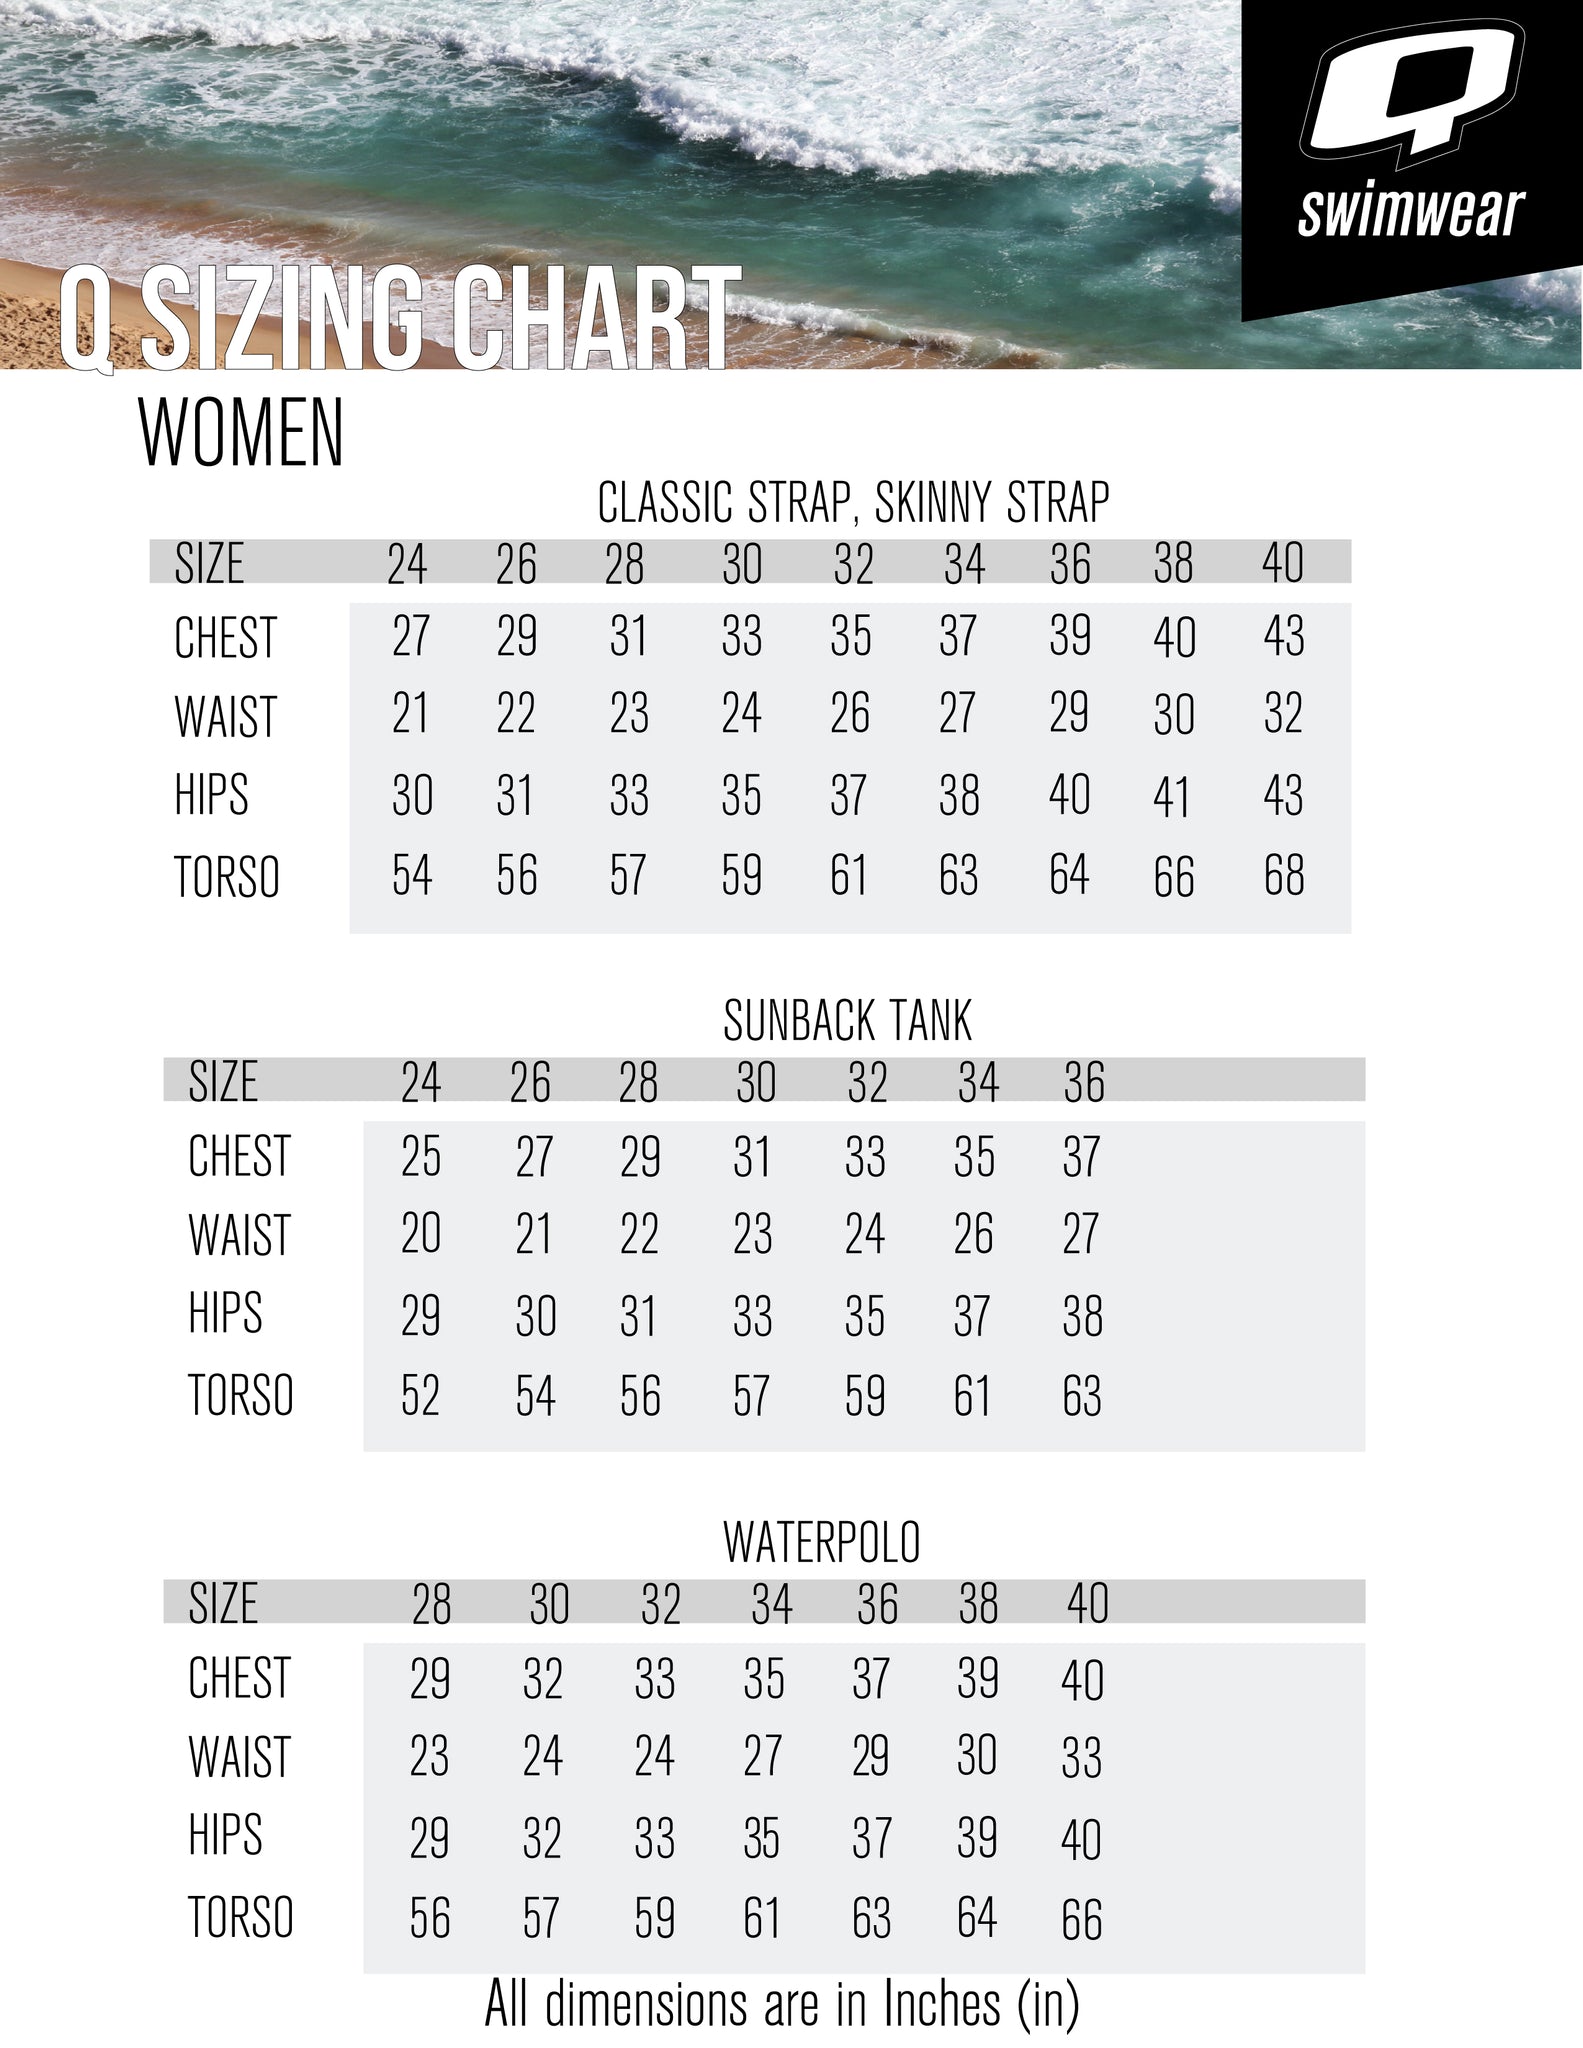 nike one piece swimsuit size chart